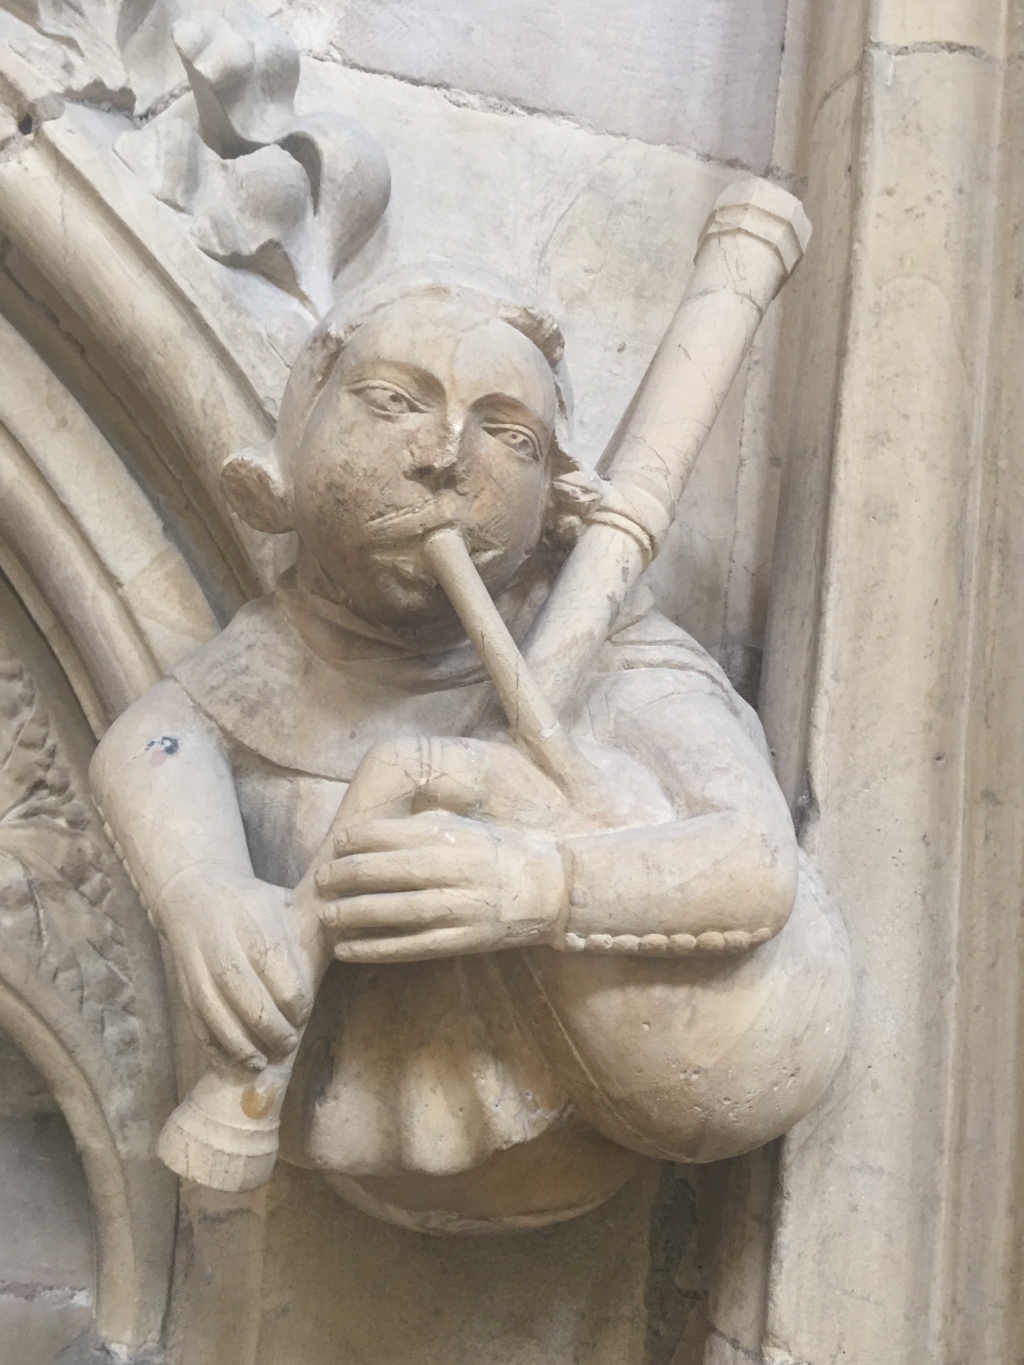 Monuments and Medieval Minstrels at Beverley Minster